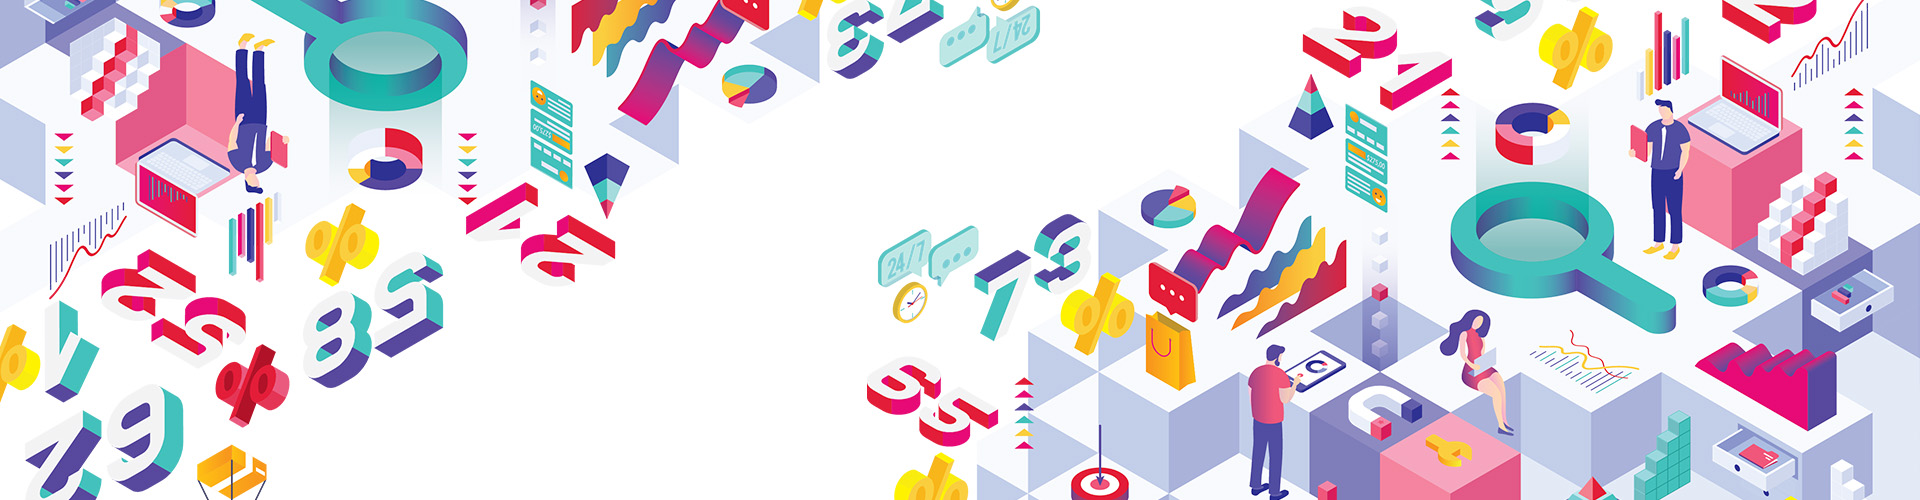 The Future of Shopping Life 2018-2019 Report Banner featuring colorful vector illustrations